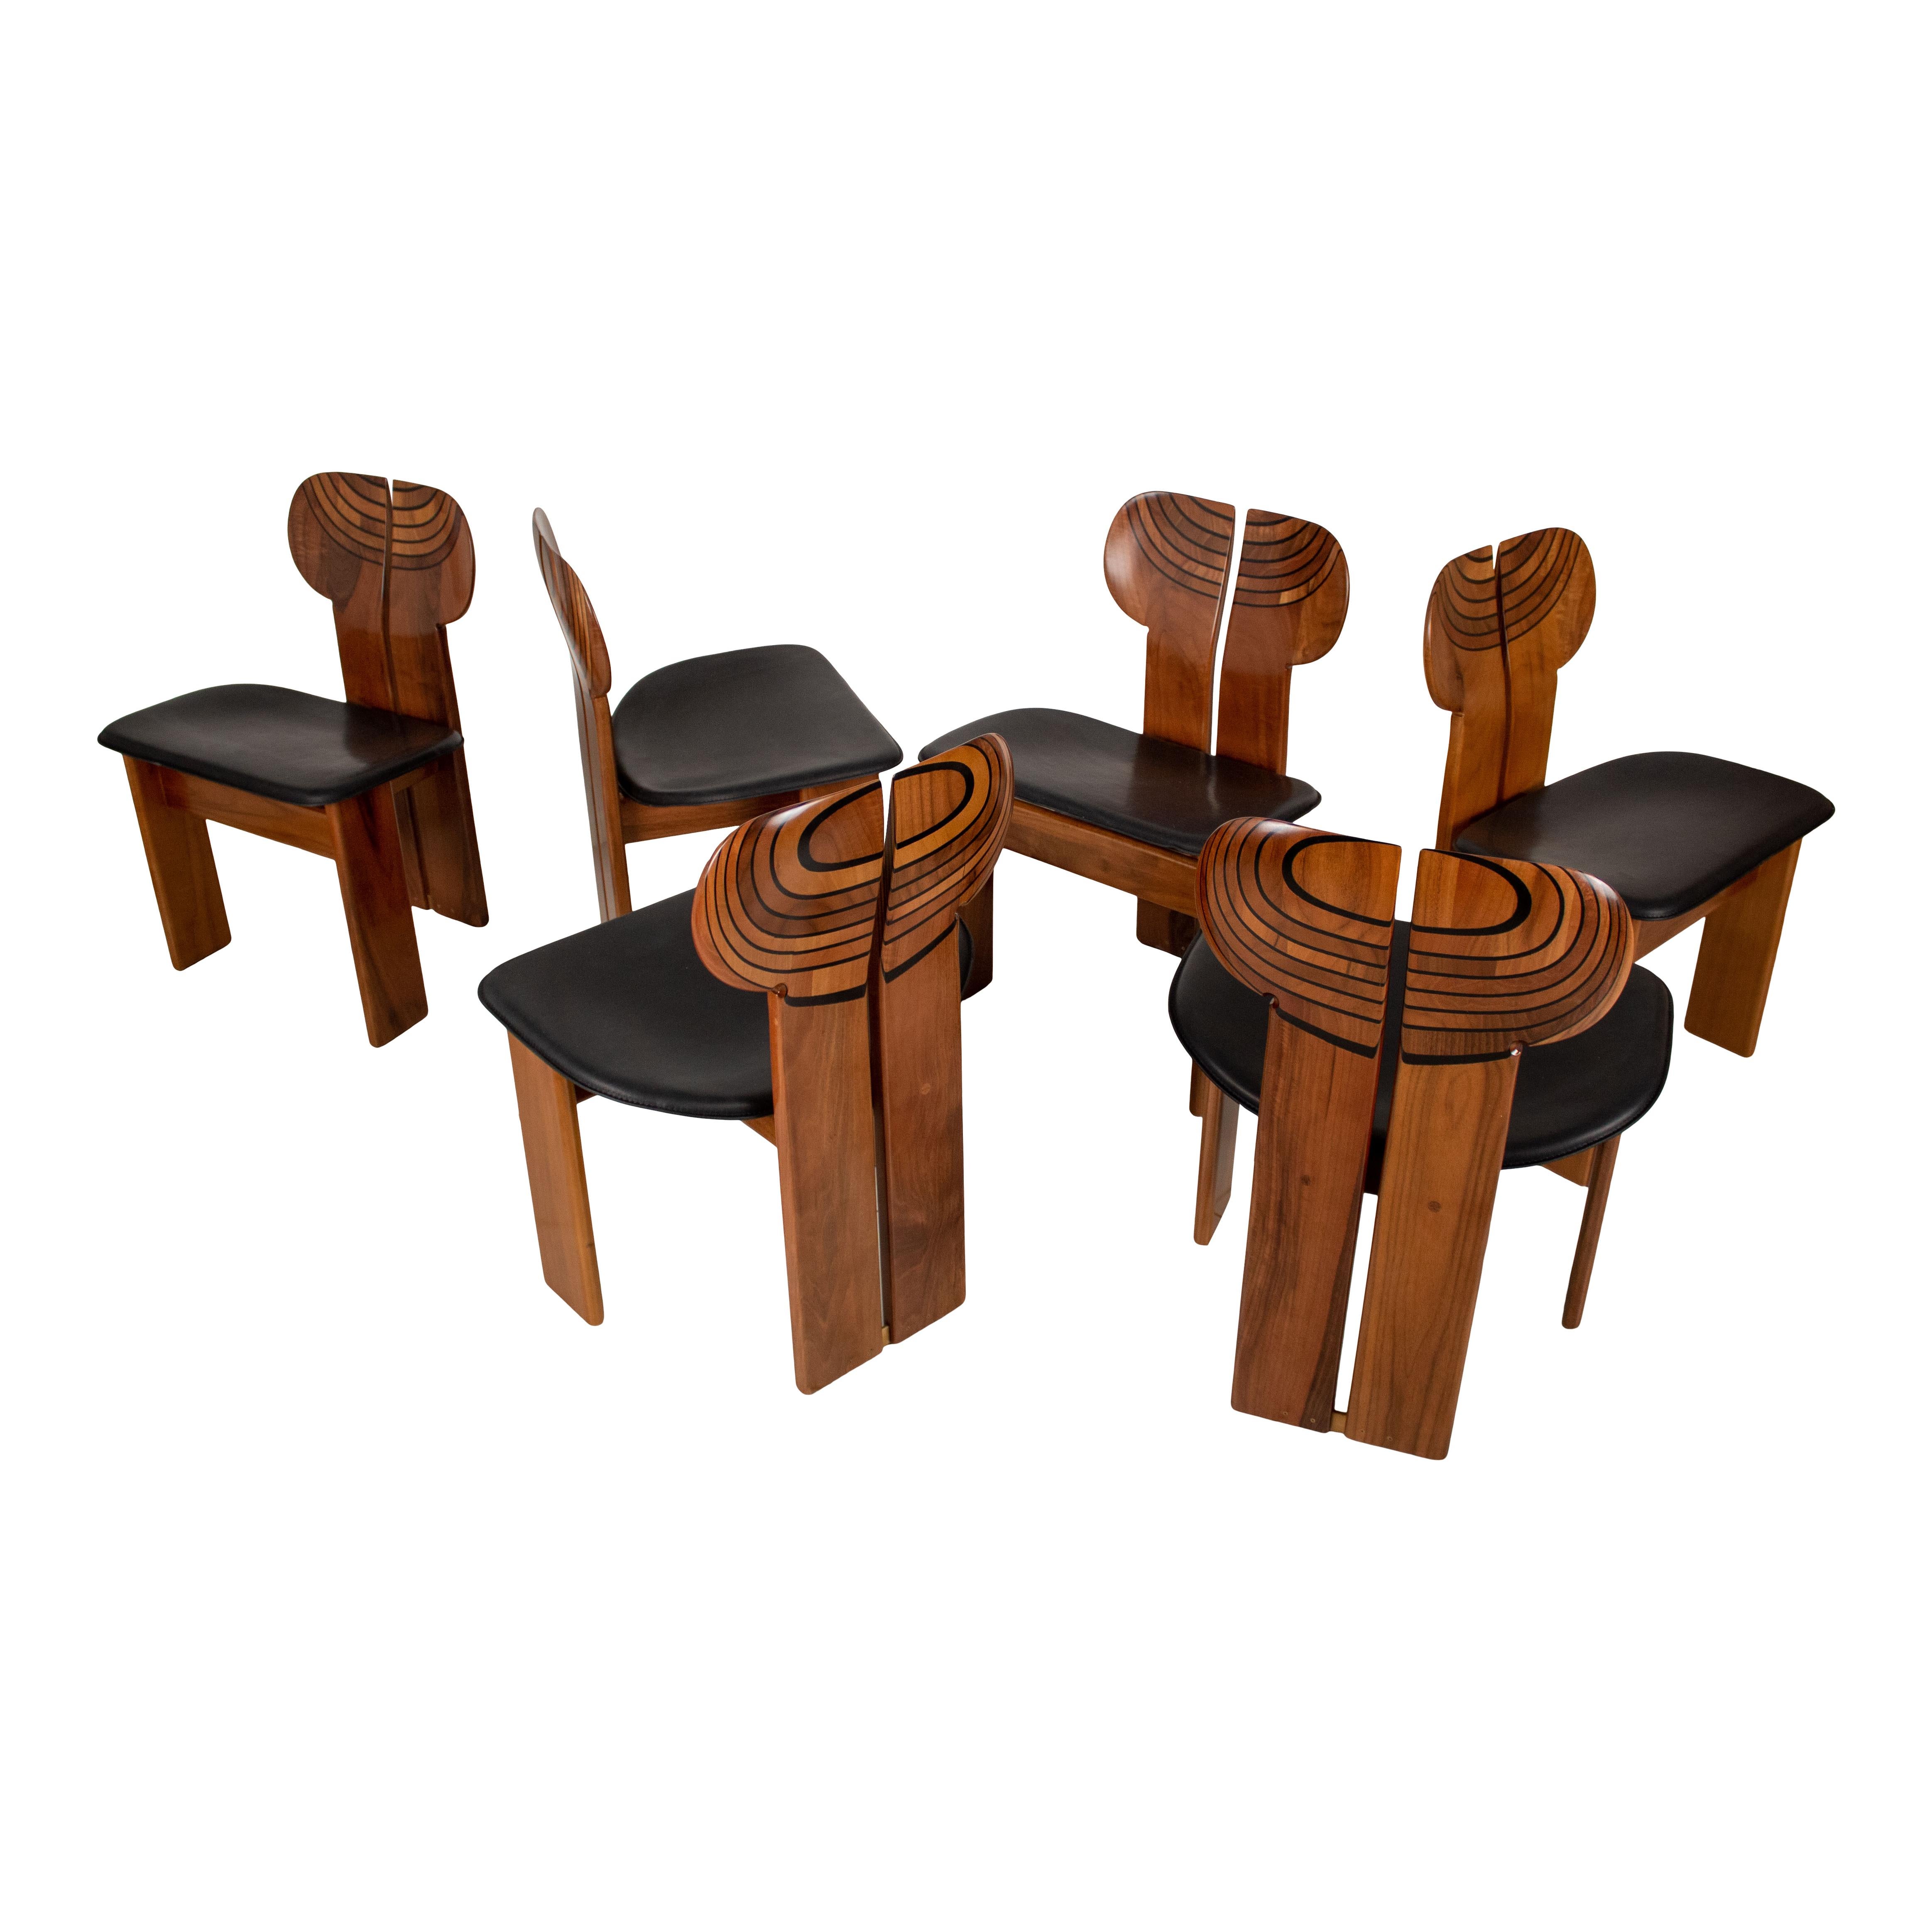 Set of six Africa dining chairs, designed by Afra and Tobia Scarpa and produced by the Italian manufacturer Maxalto in 1976.
They feature a clear walnut briar structure and a black and cognac leather seat.
Fully restored in Italy.

The main